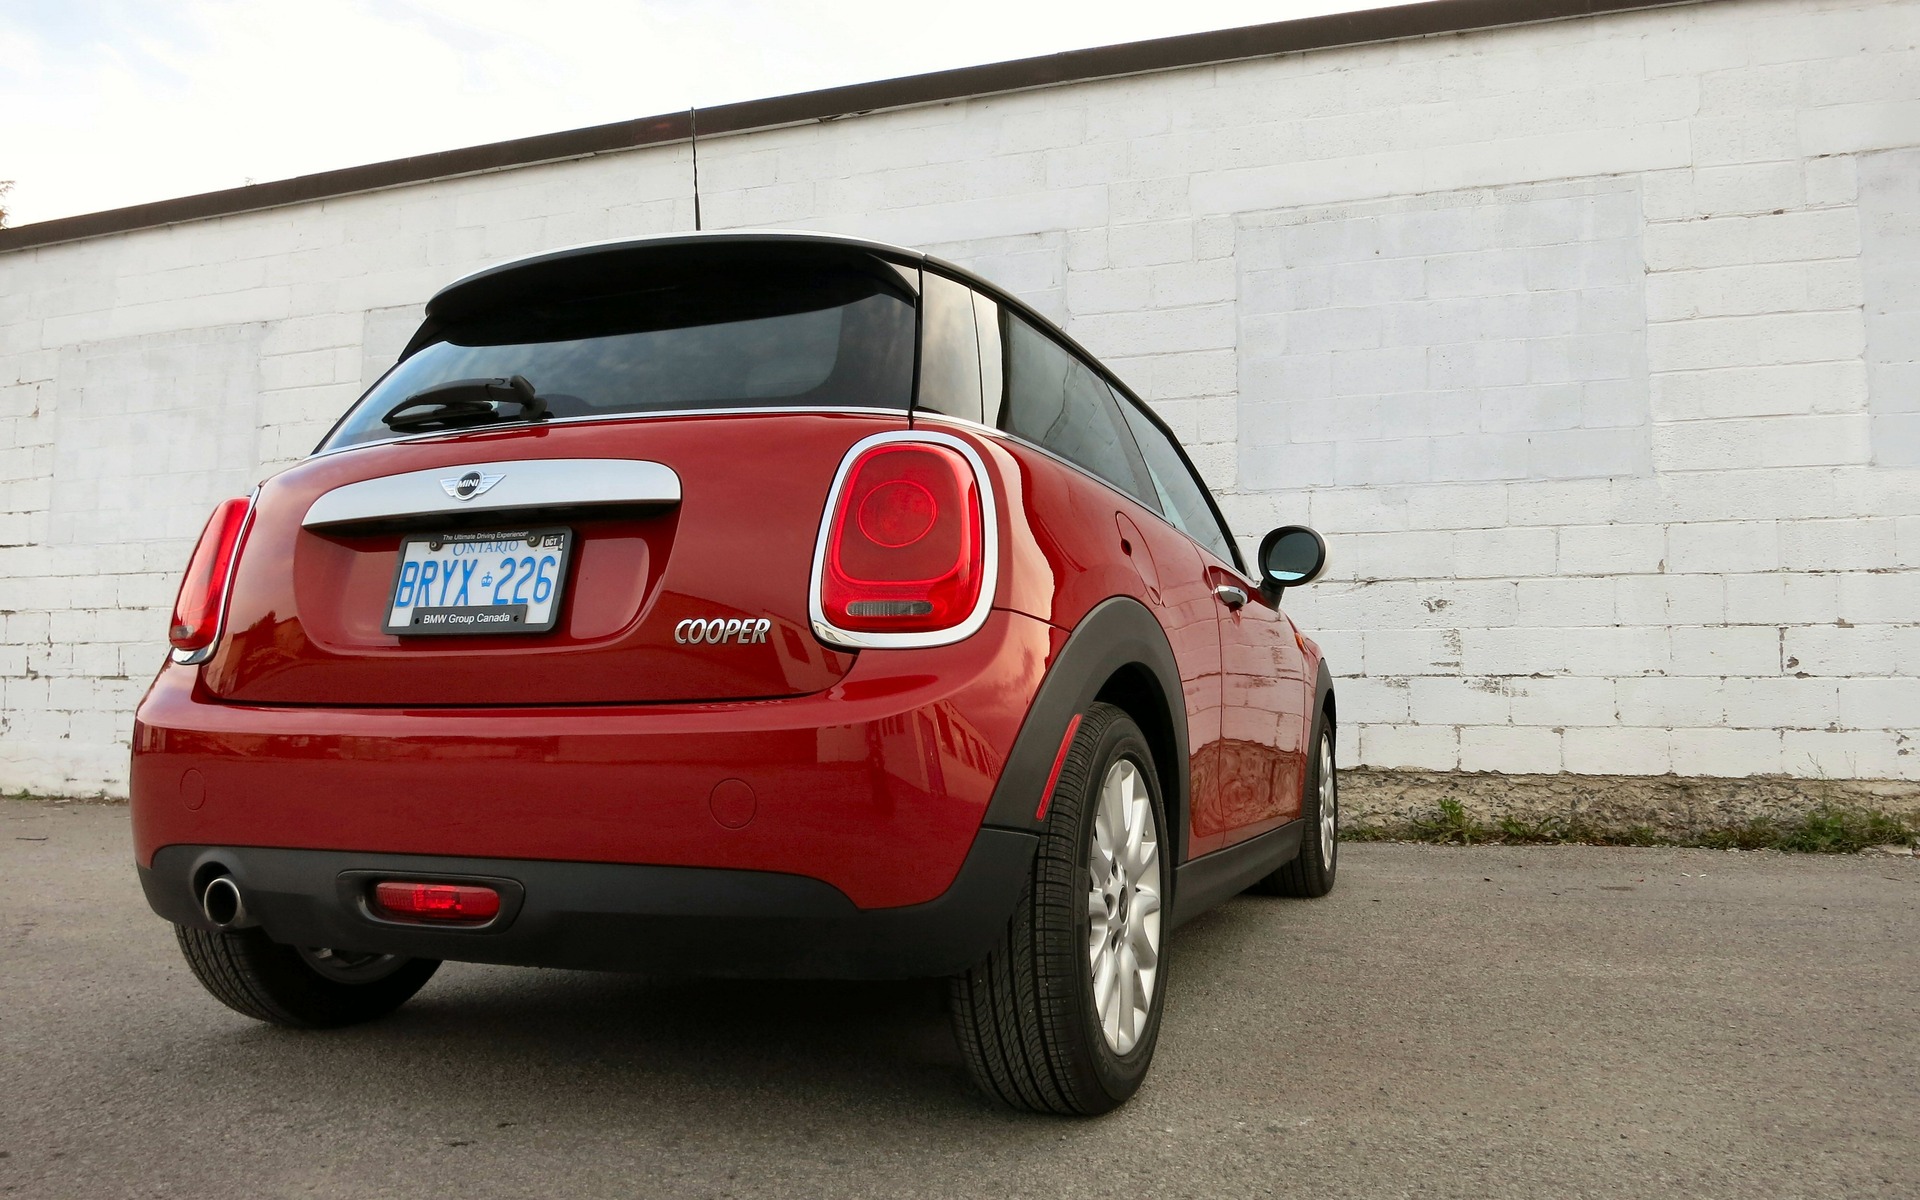 I was routinely impressed by how well the MINI Cooper drove.